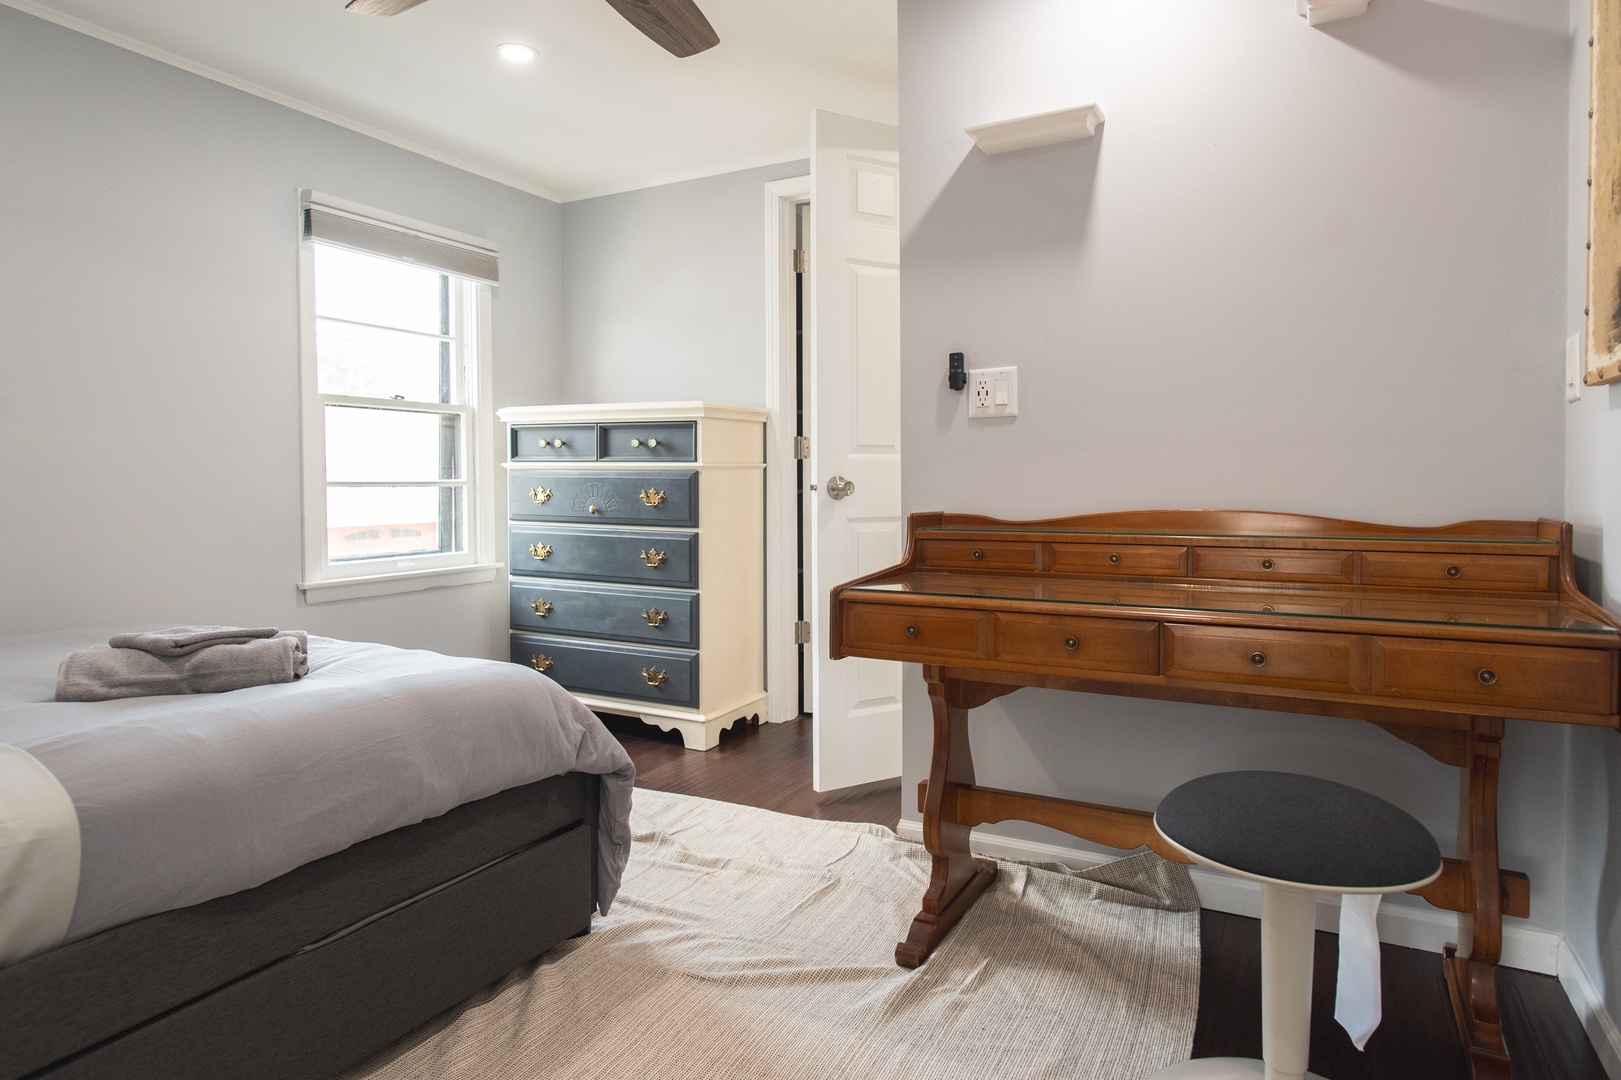 The apartment’s bedroom offers a full-sized bed, desk, & ceiling fan